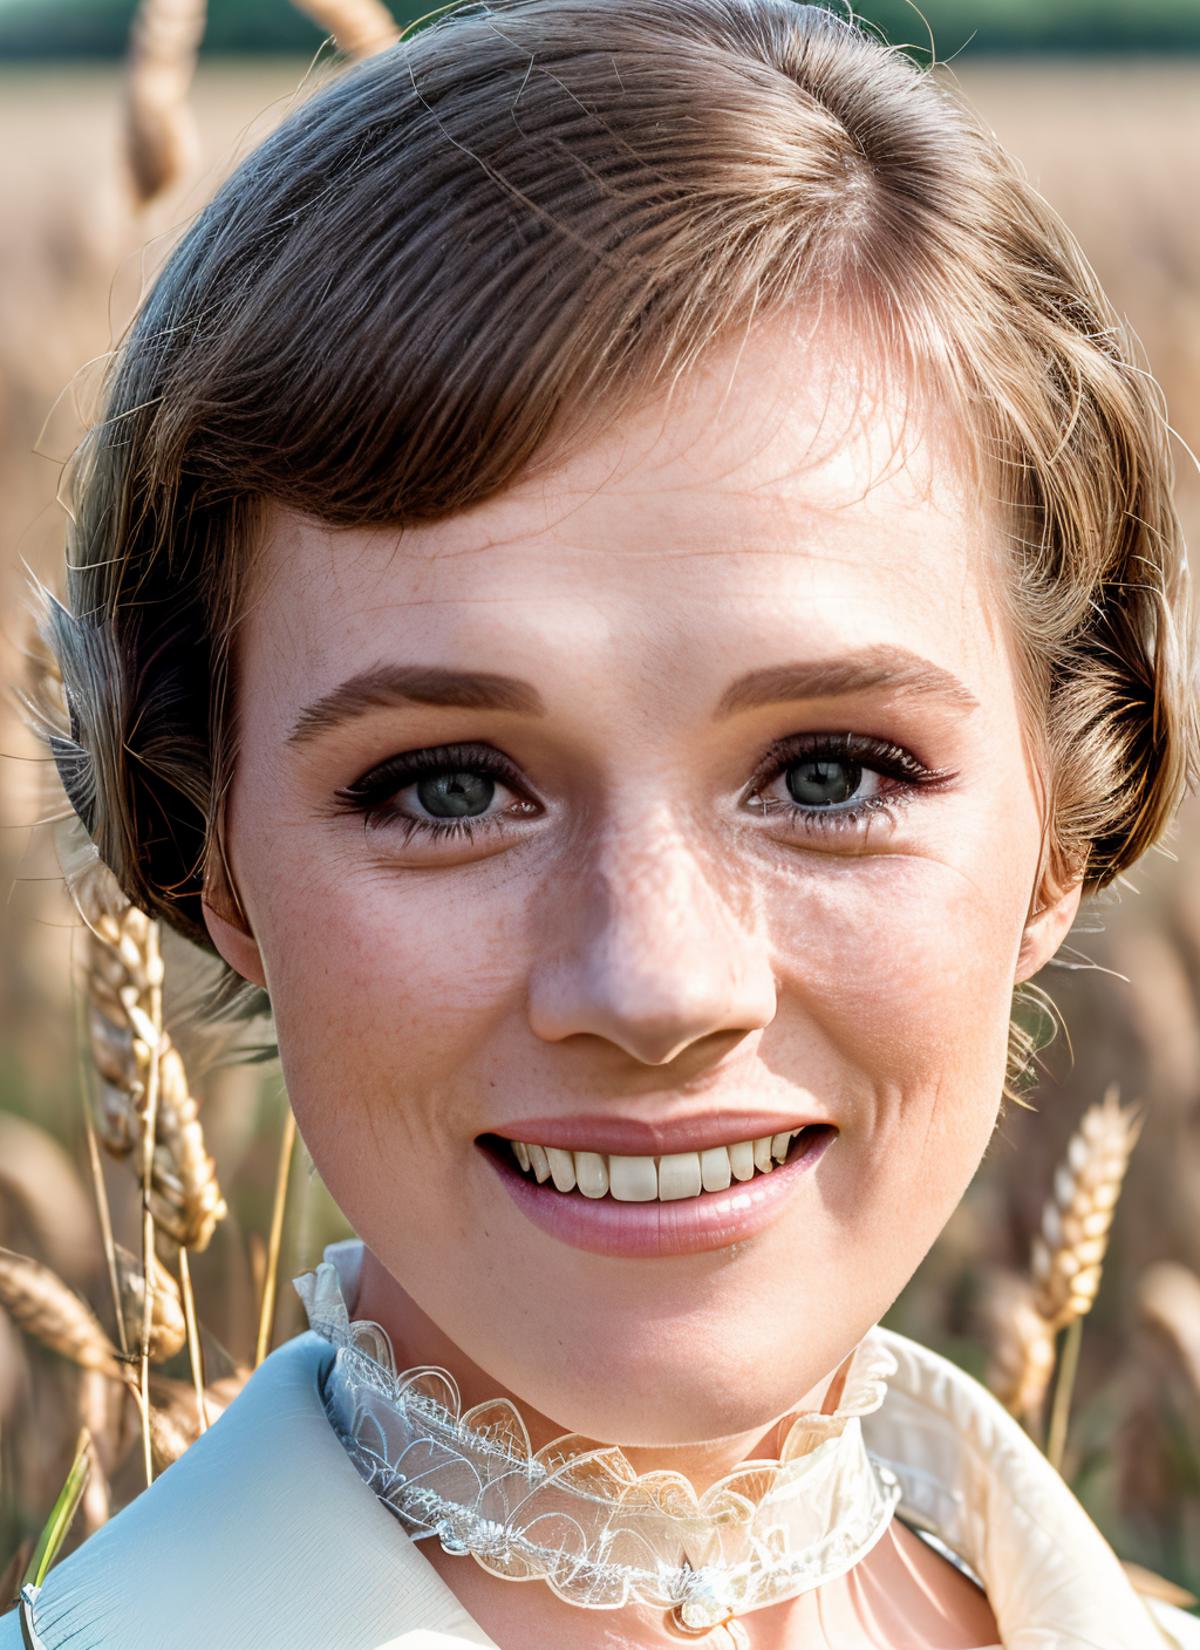 Julie Andrews (Mary Poppins and Maria von Trapp from The Sound of Music movies) image by astragartist